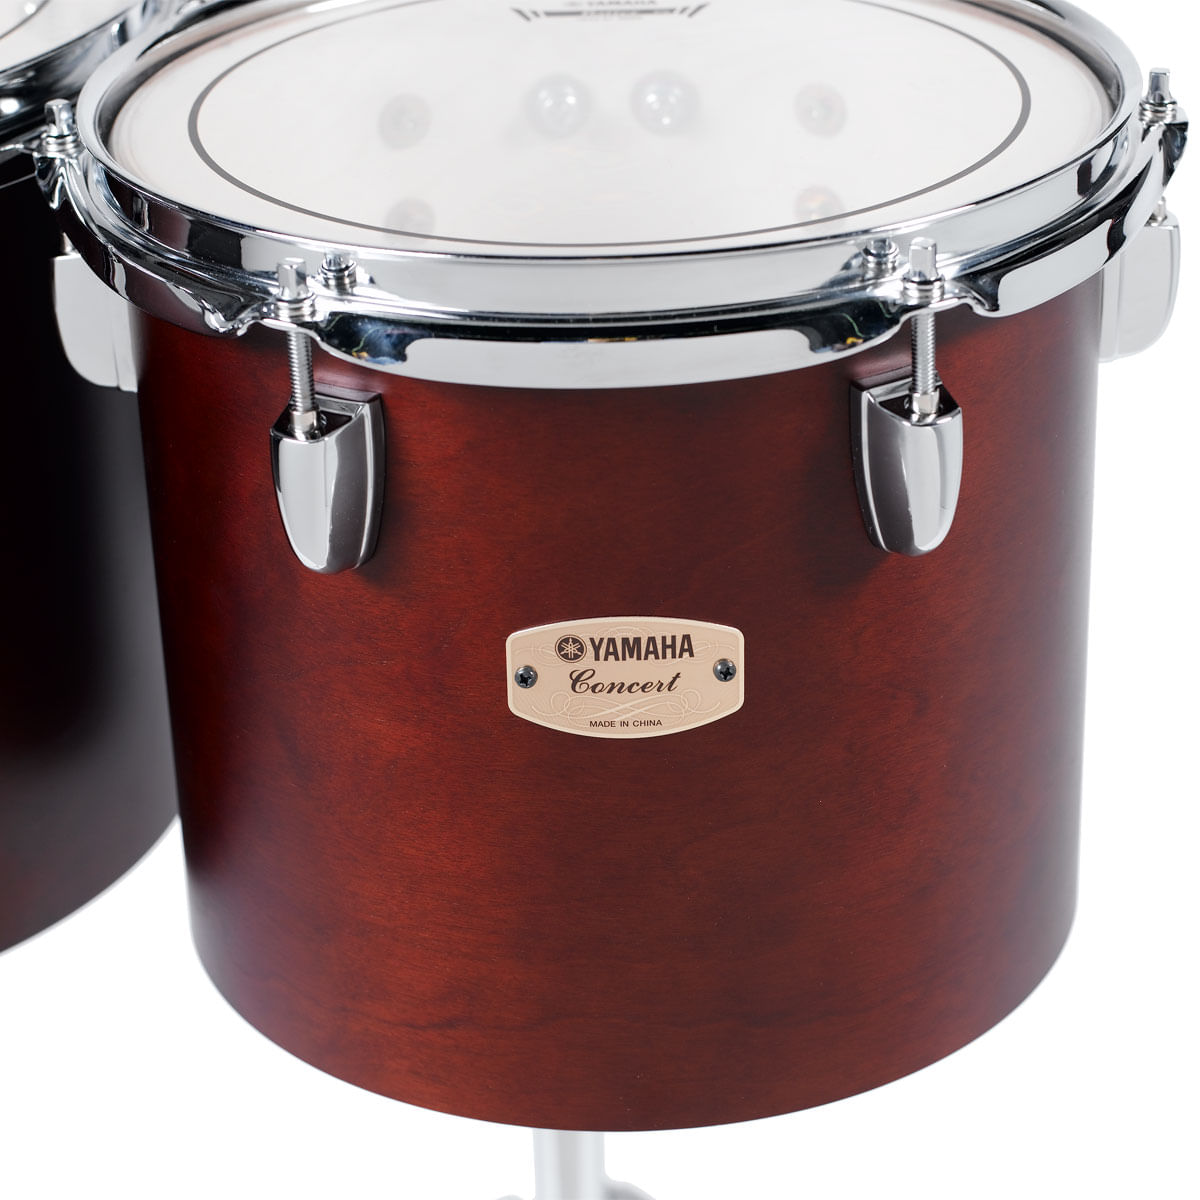 View larger image of Yamaha CT8006 Concert Tom Drum